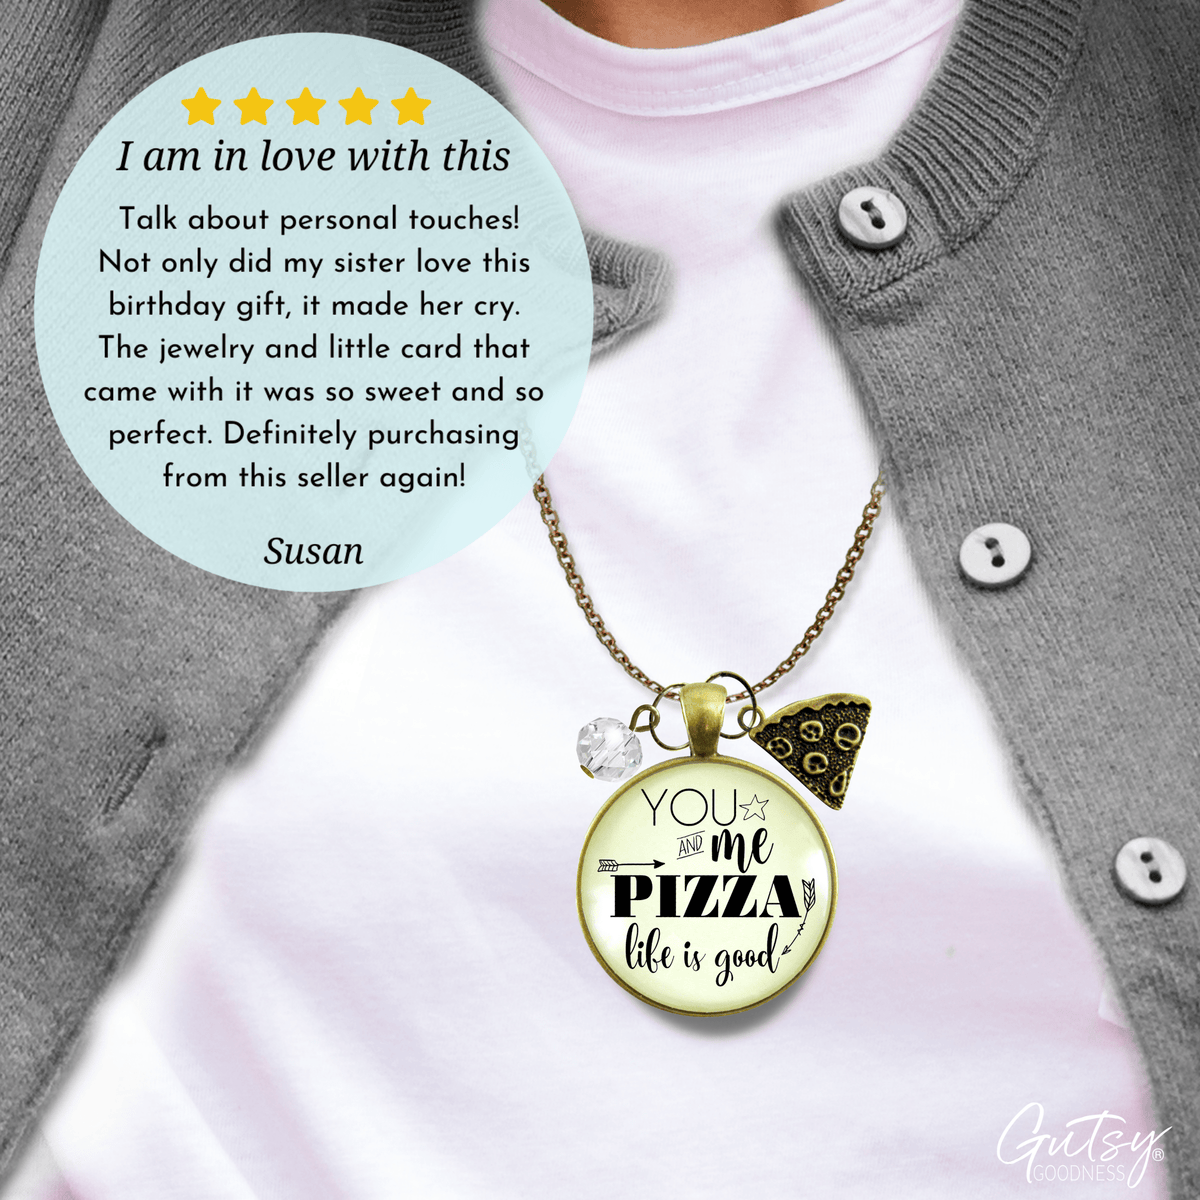 Gutsy Goodness Pizza Necklace You Me Pizza Life is Good Friendship Charm - Gutsy Goodness Handmade Jewelry;Pizza Necklace You Me Pizza Life Is Good Friendship Charm - Gutsy Goodness Handmade Jewelry Gifts